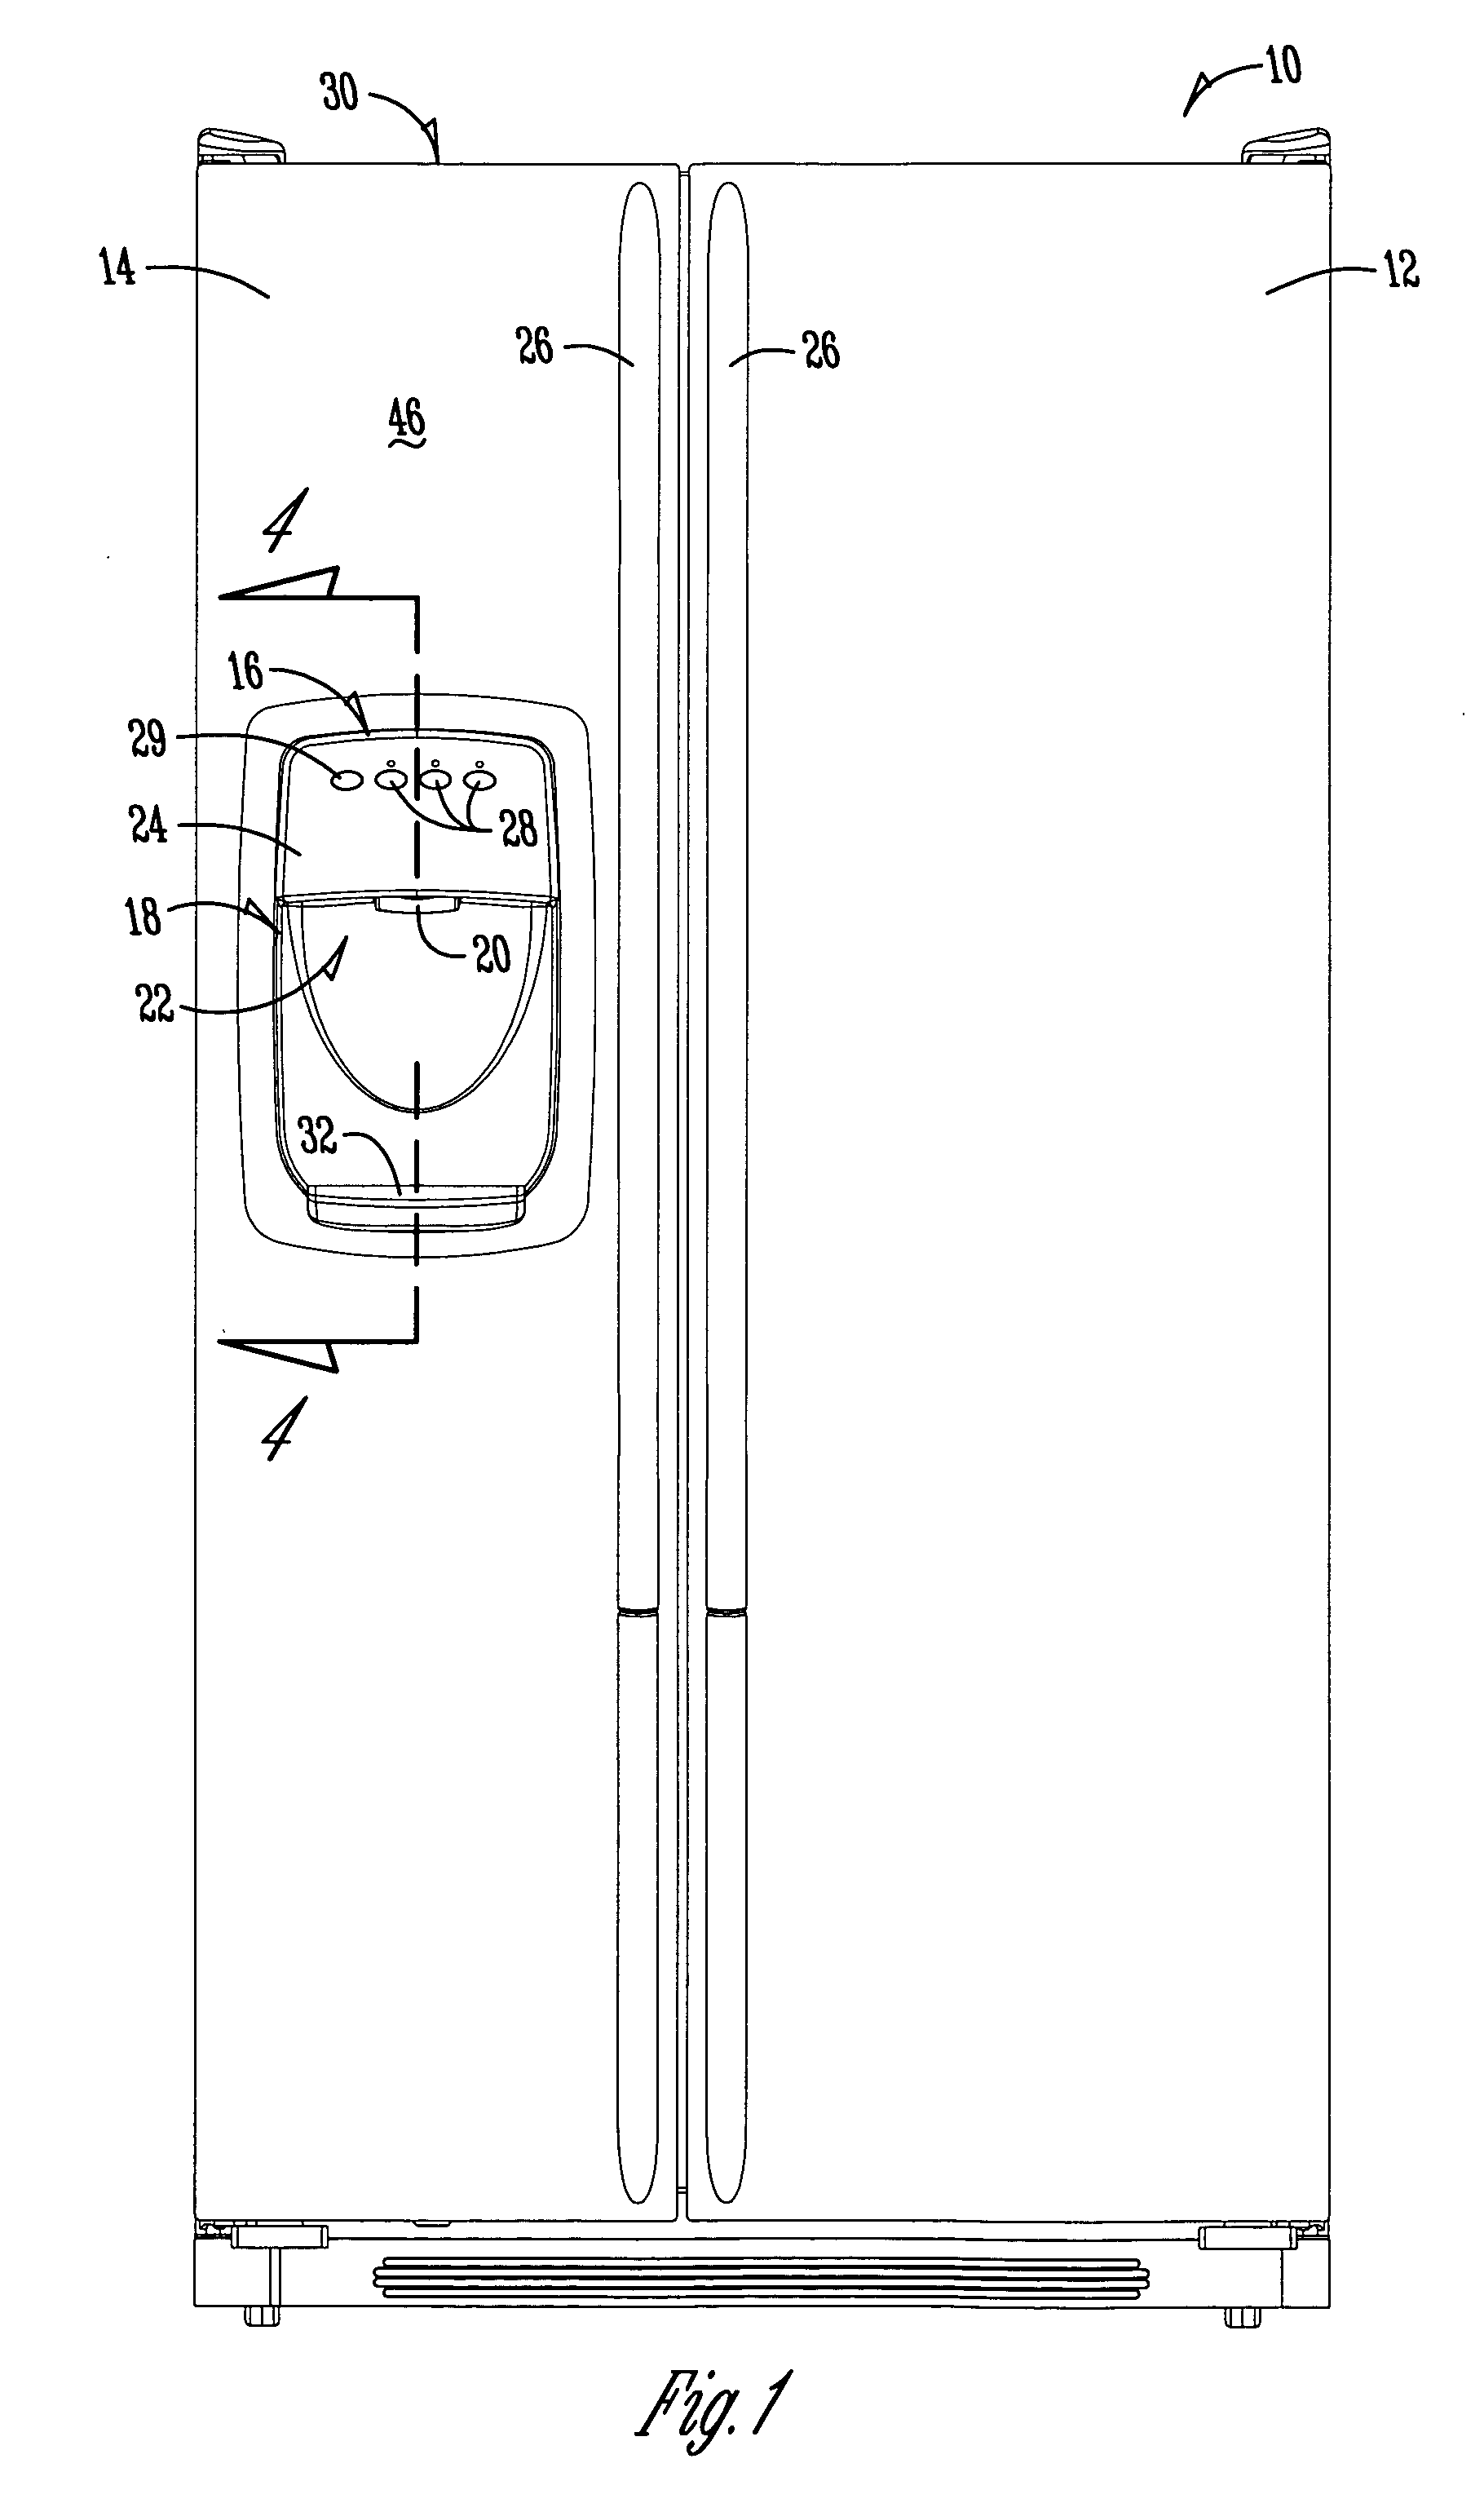 Refrigerator with improved water and ice dispenser